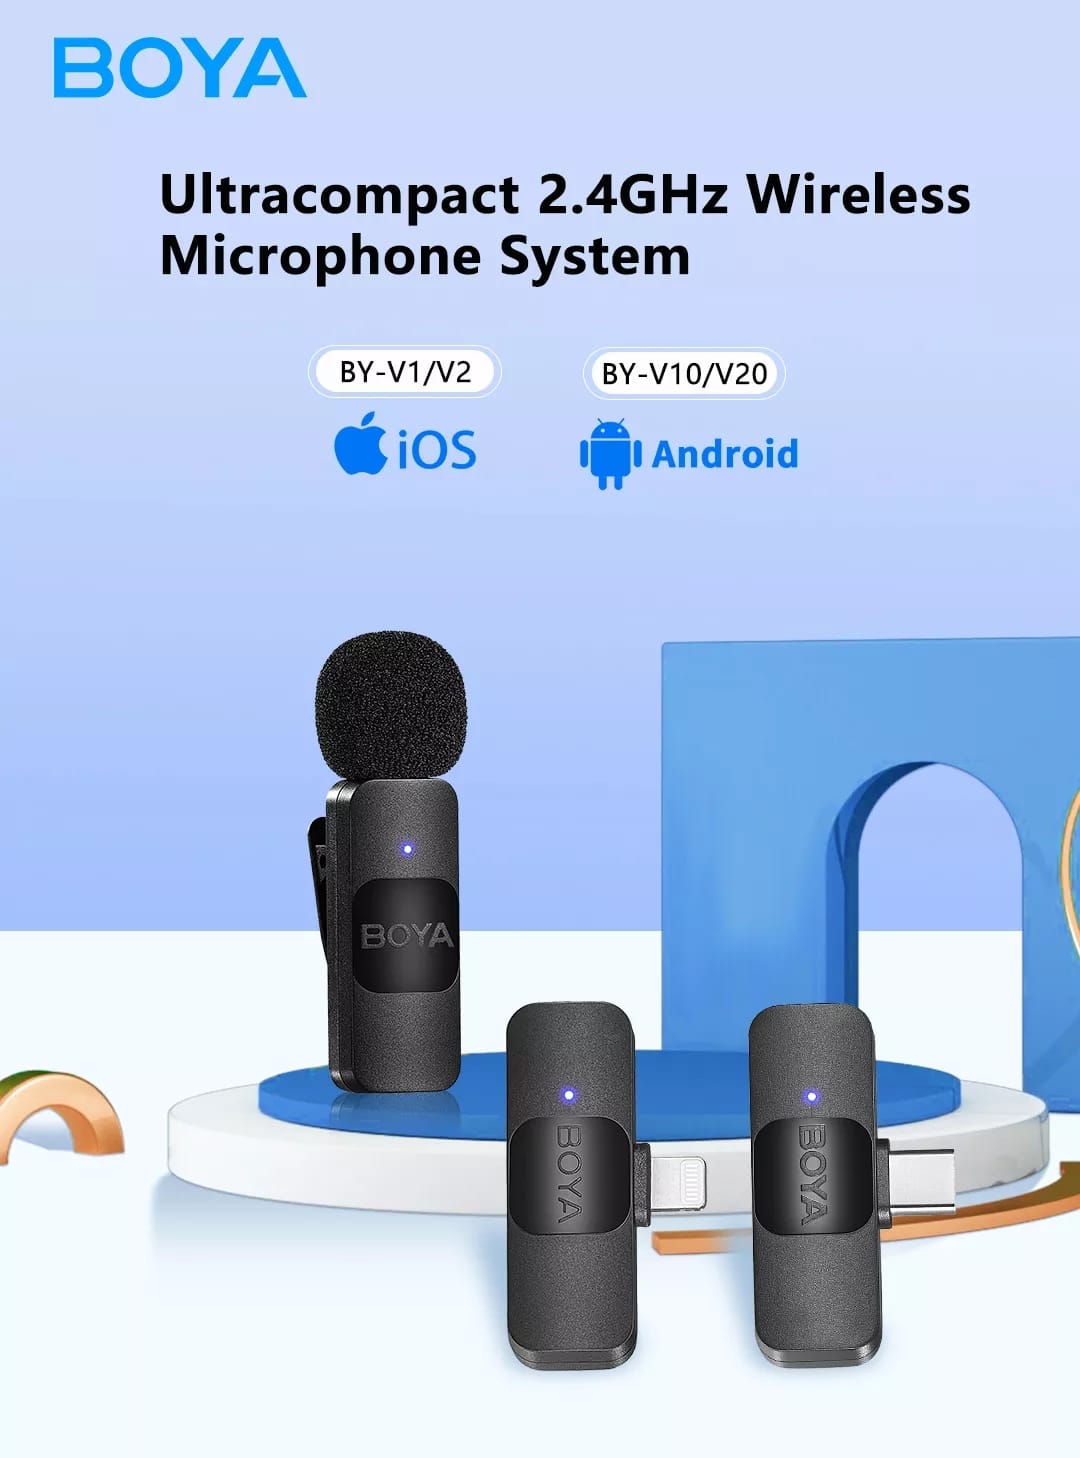 BOYA BY V10 Ultracompact 2.4GHz Wireless Microphone for Type C device 2